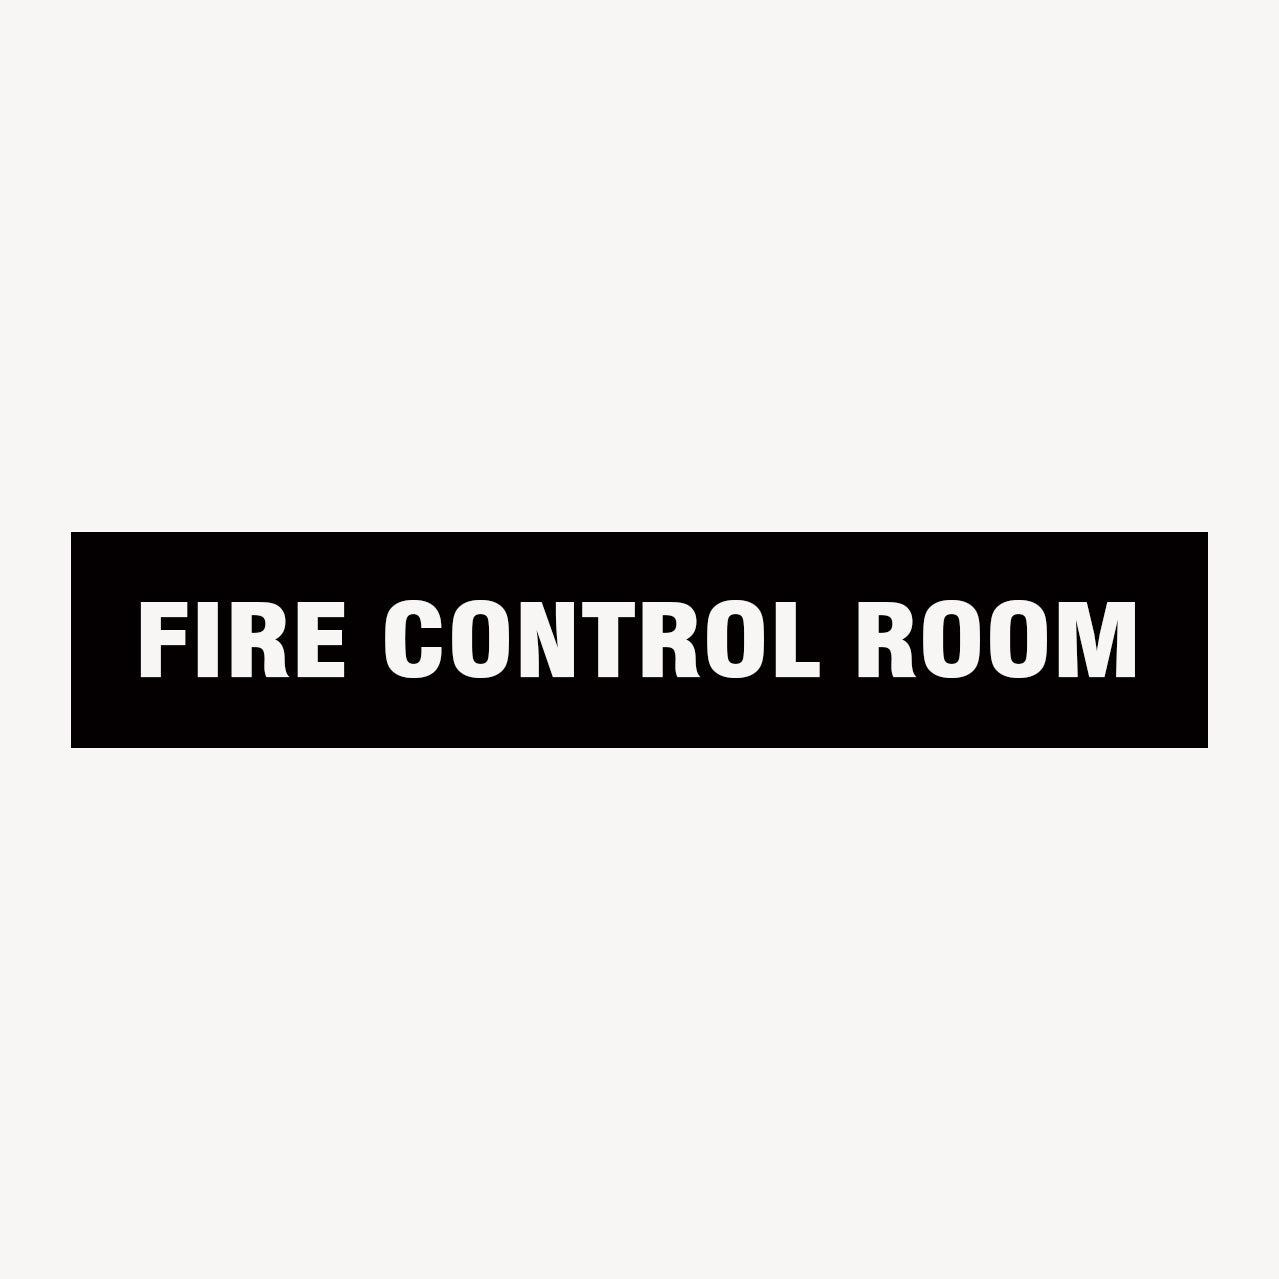 FIRE CONTROL ROOM SIGN - STATUTORY SIGNS - ONLINE SHOP